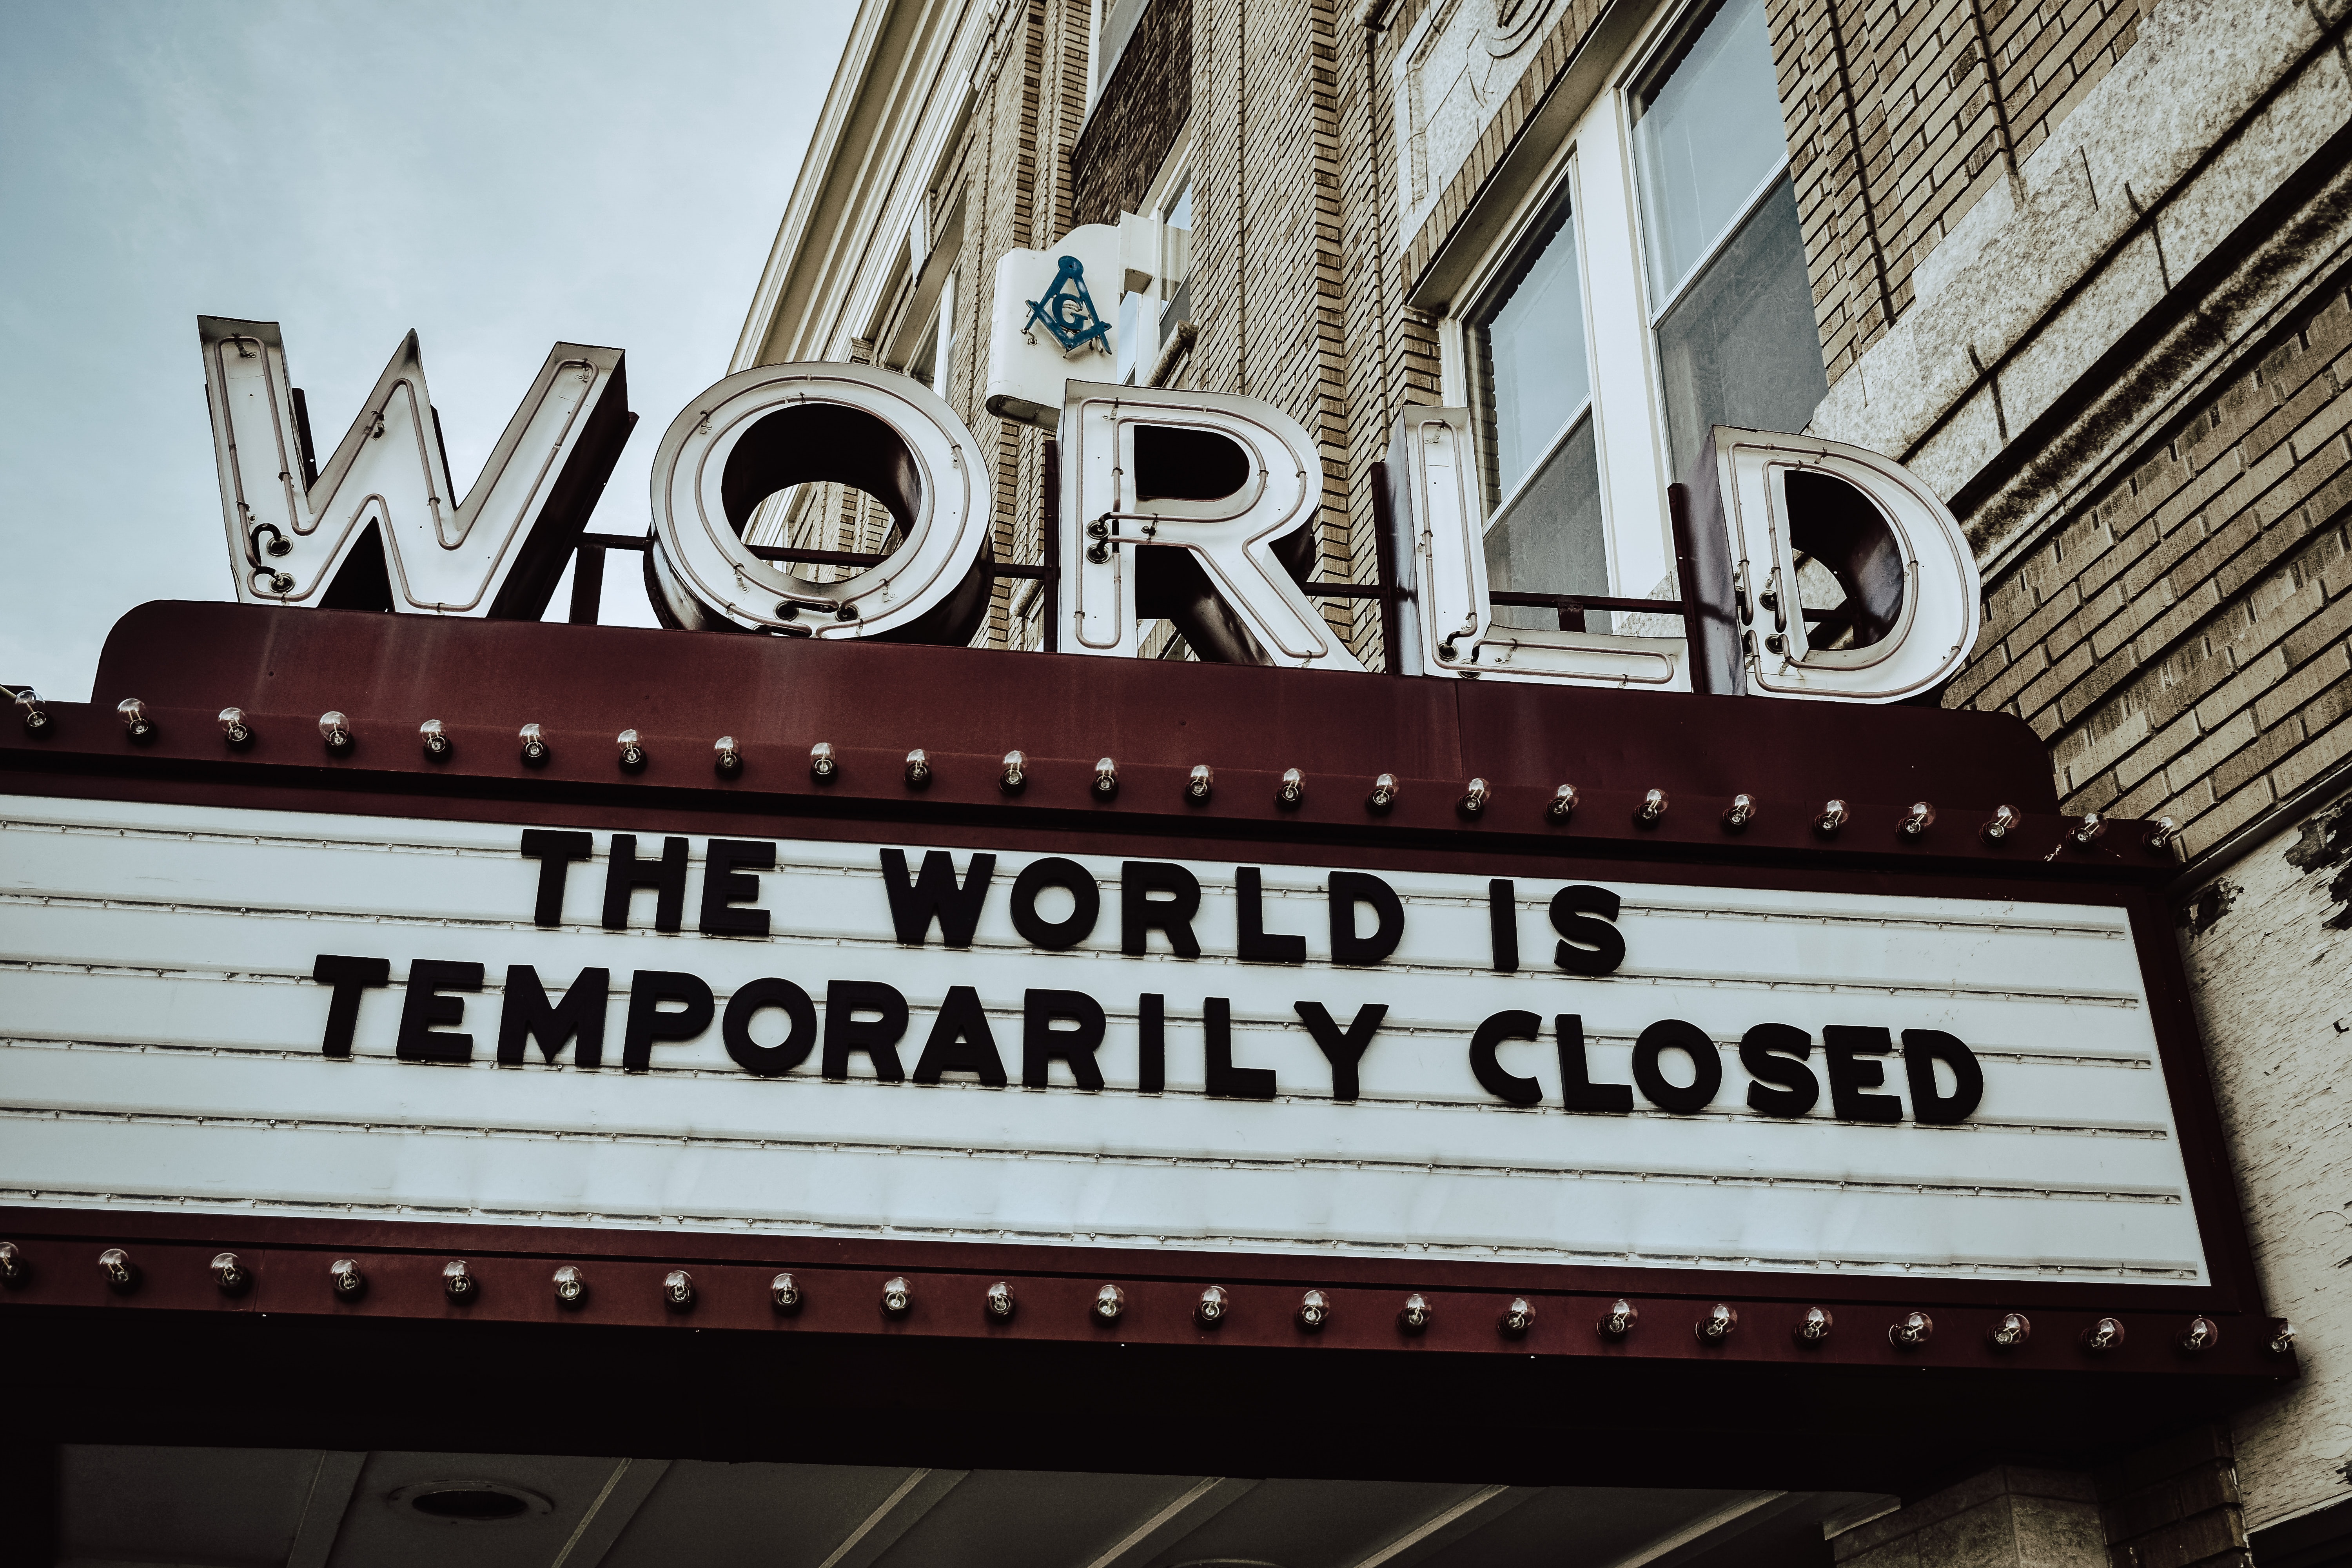 The World is Temporarily Closed letters